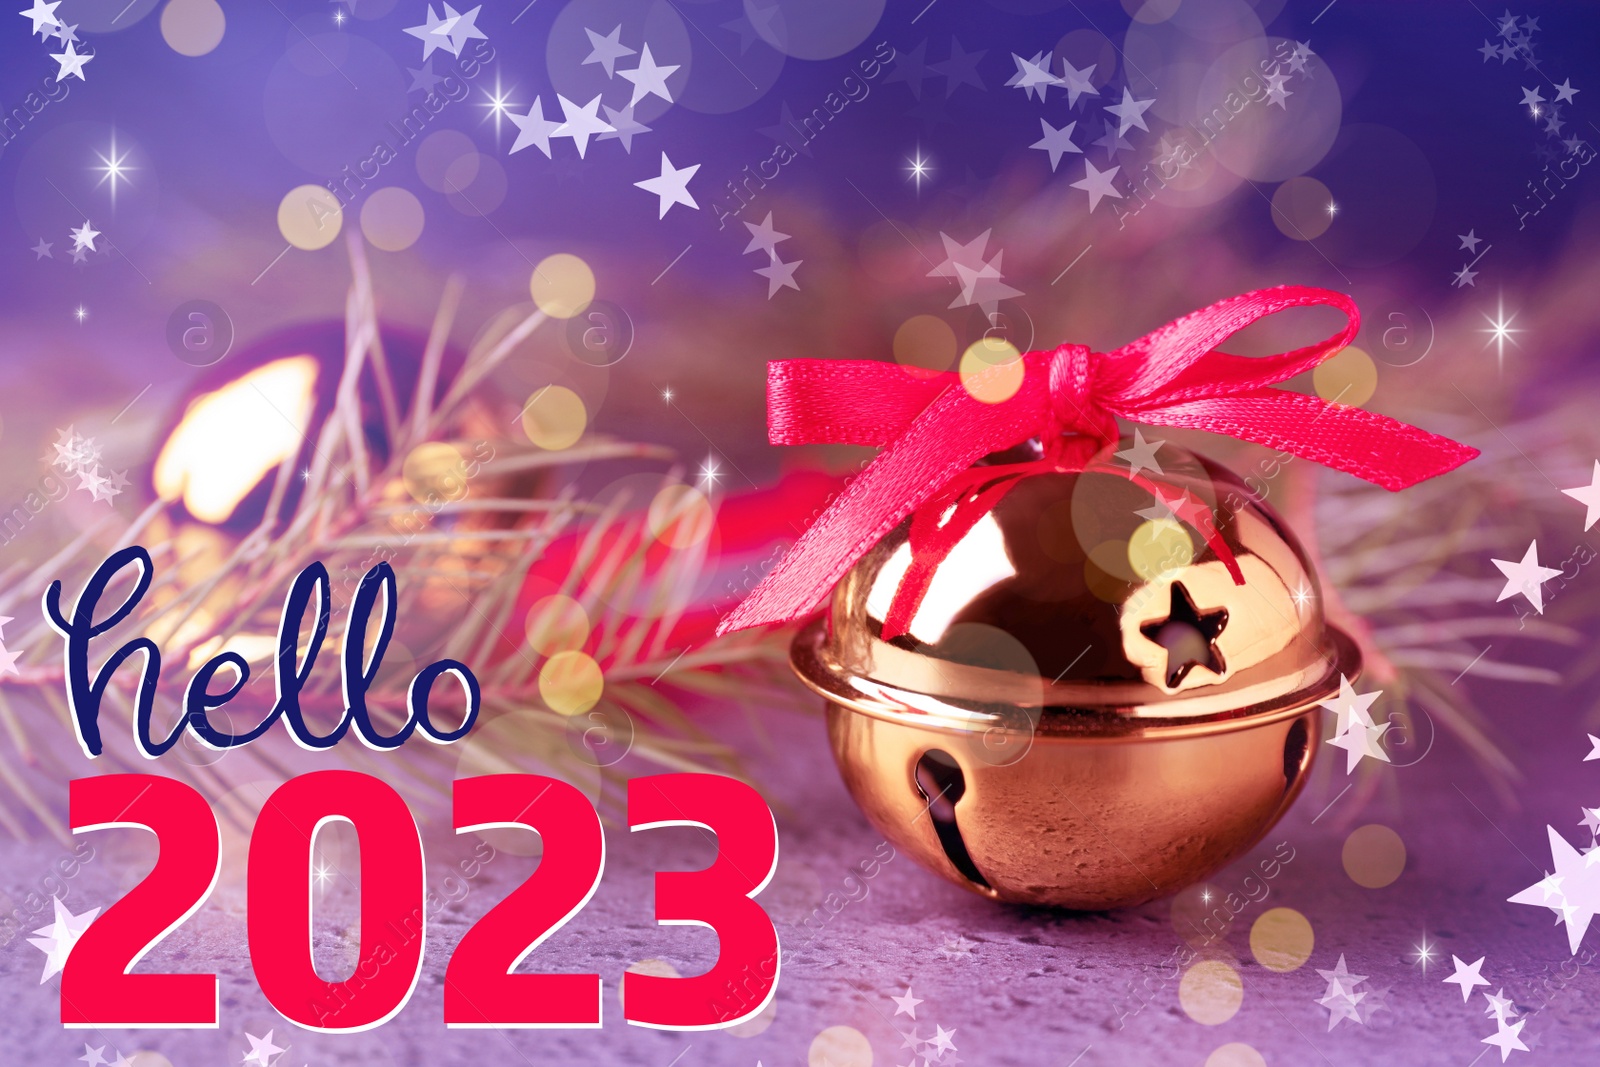 Image of Hello 2023. Golden sleigh bells and fir branches on table, closeup